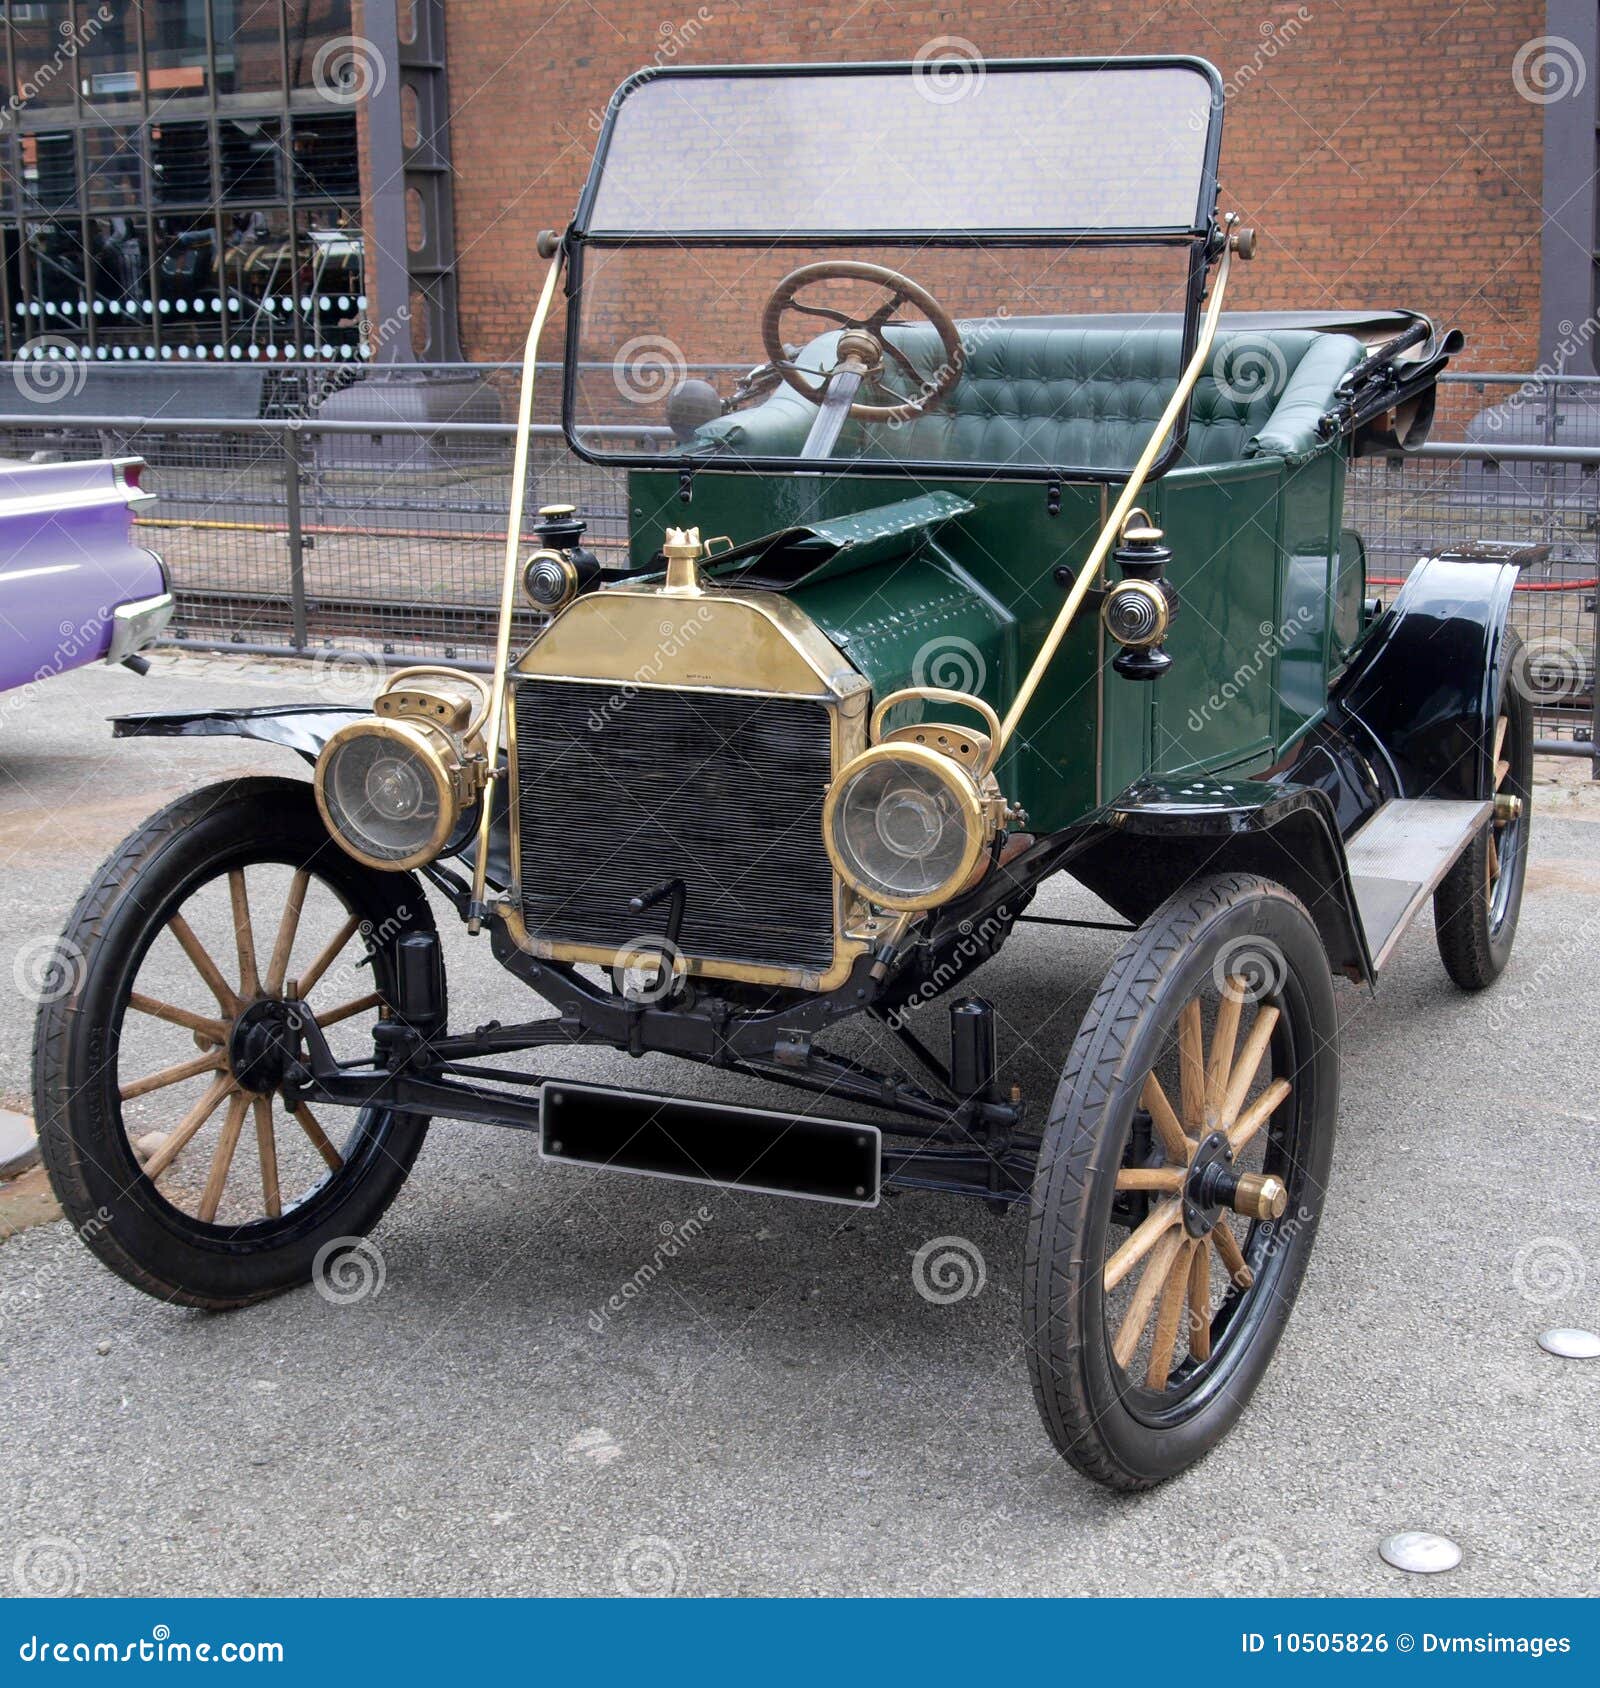 Payment plans for the ford model t #4